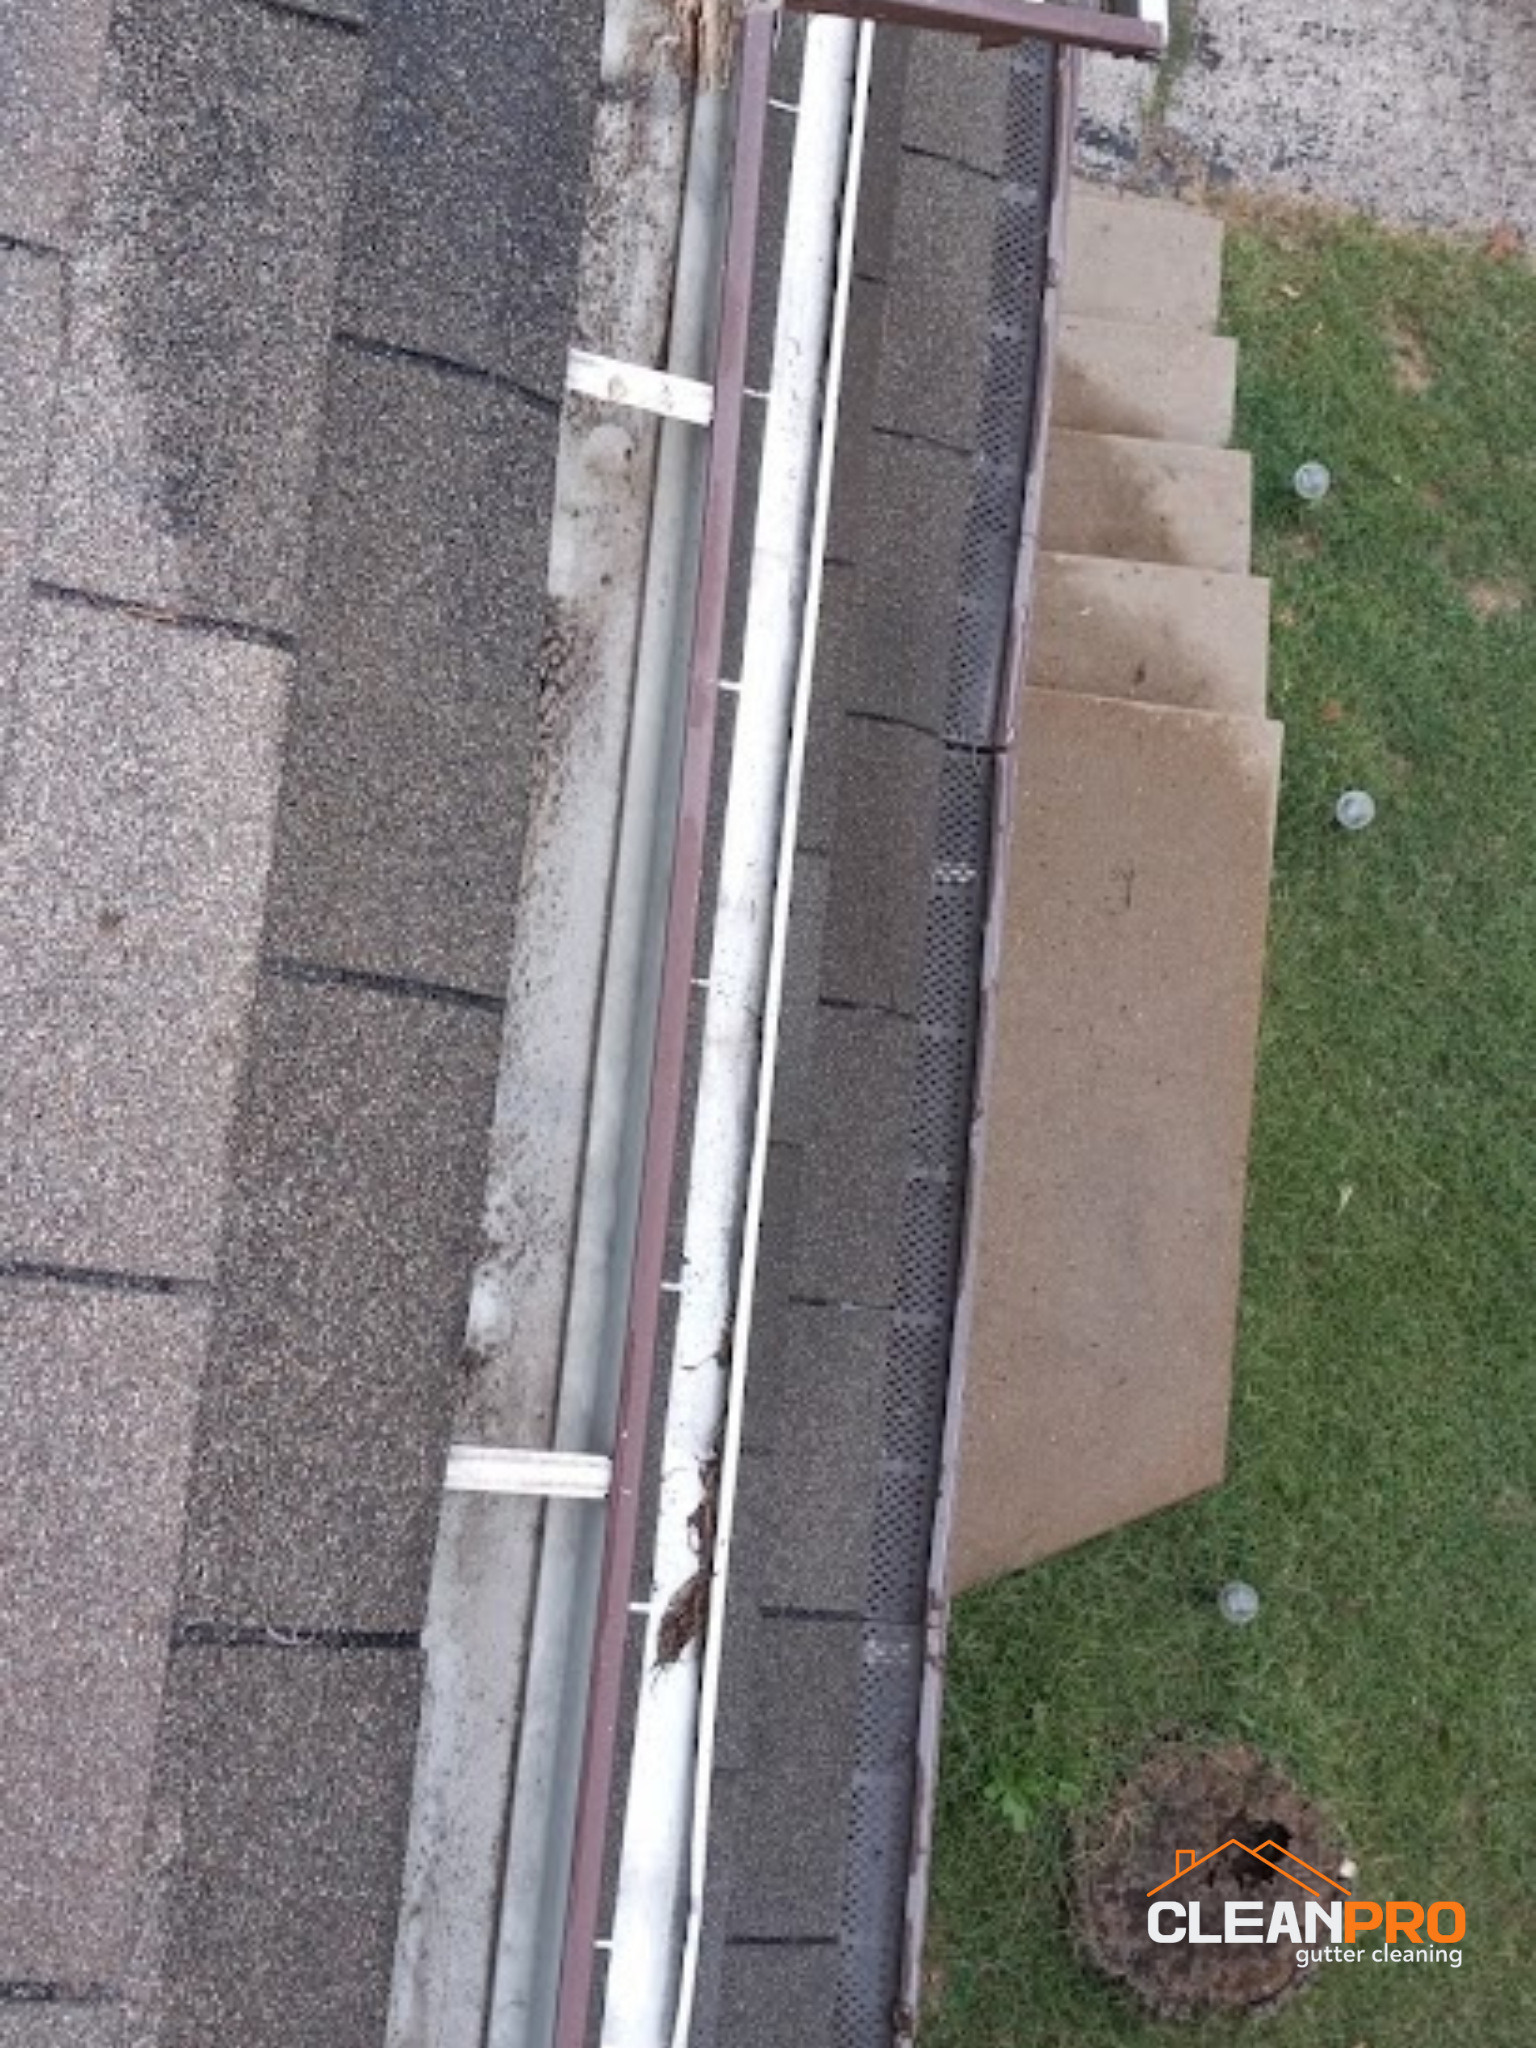 Local Gutter Cleaning in Athens